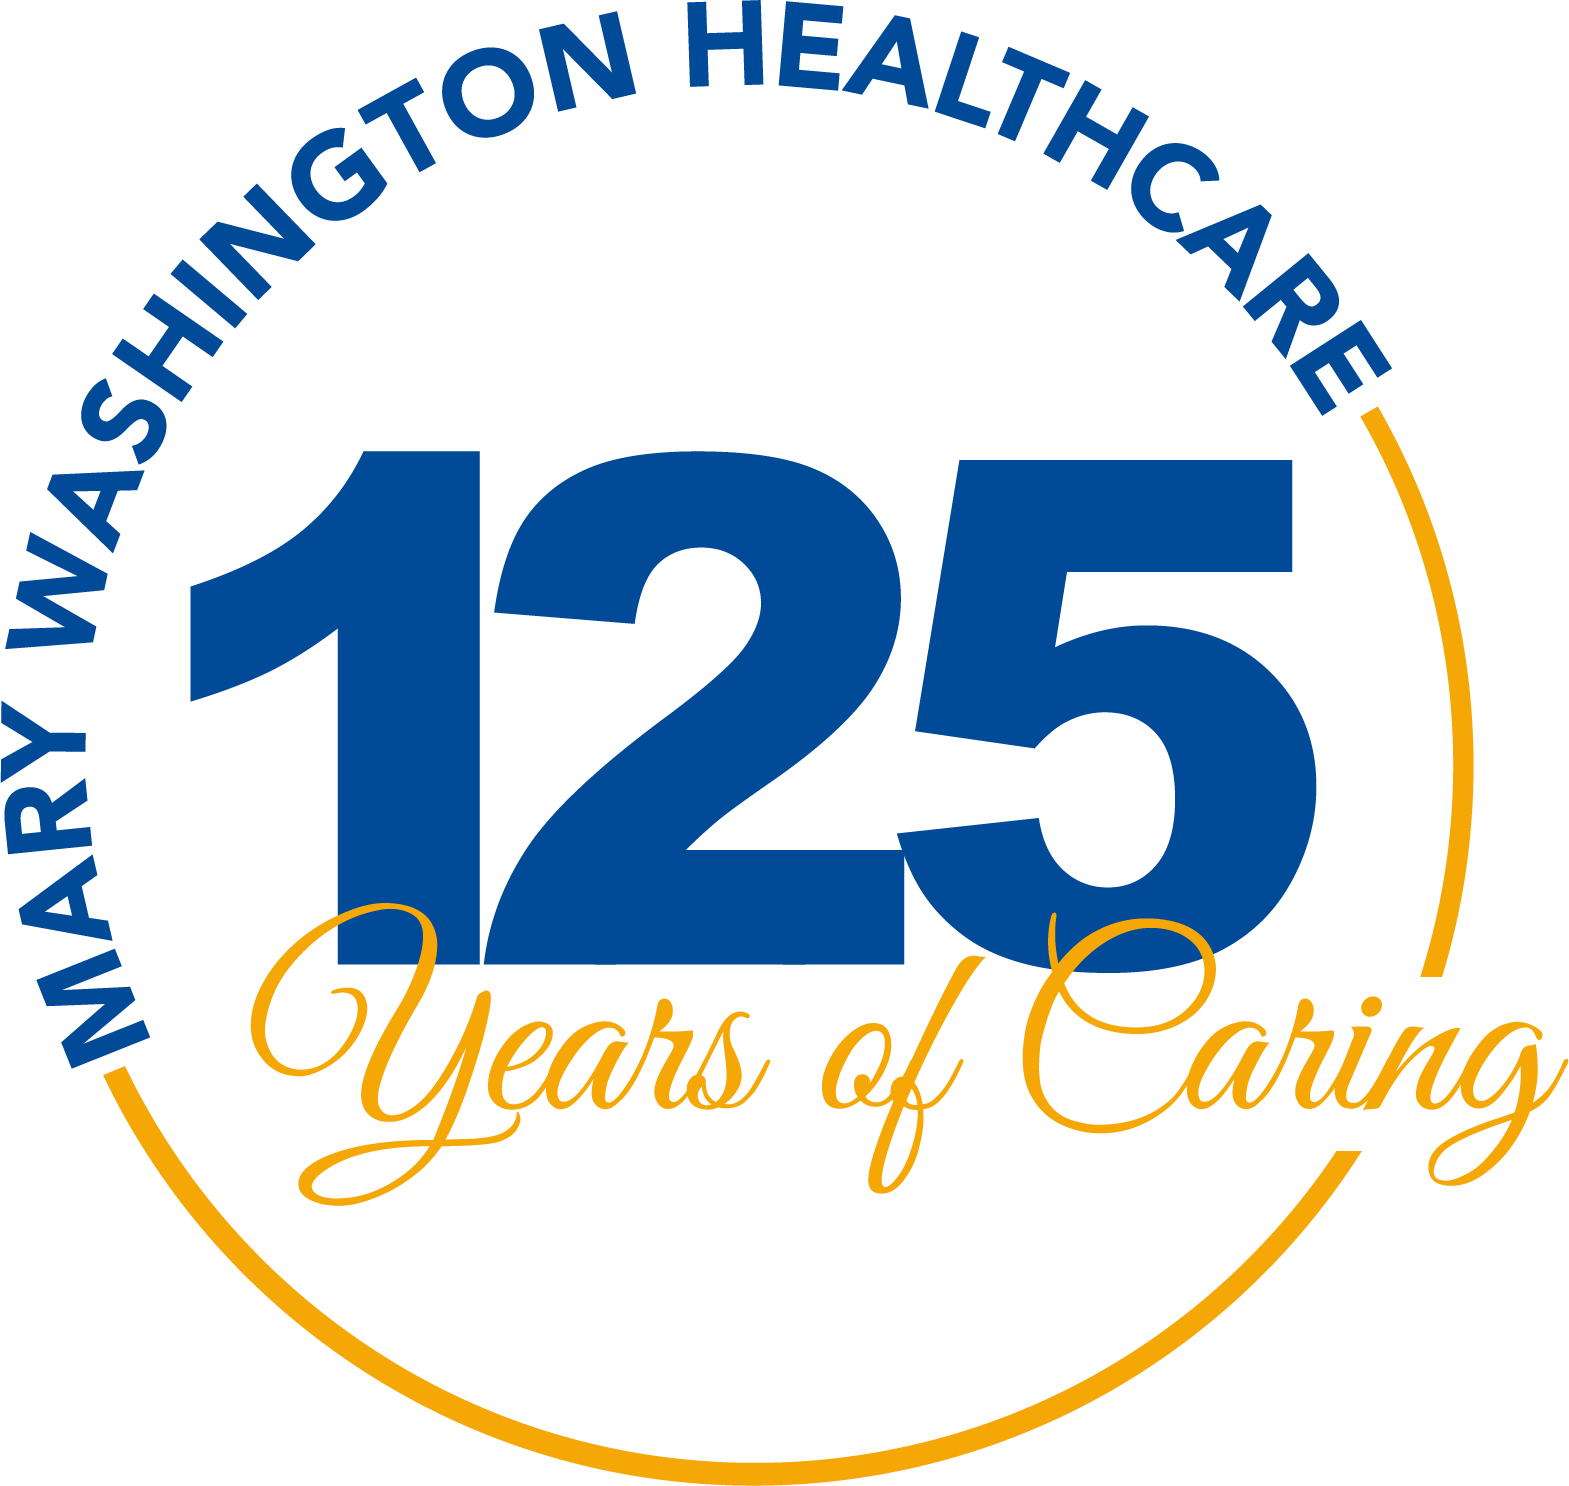 125 years of caring